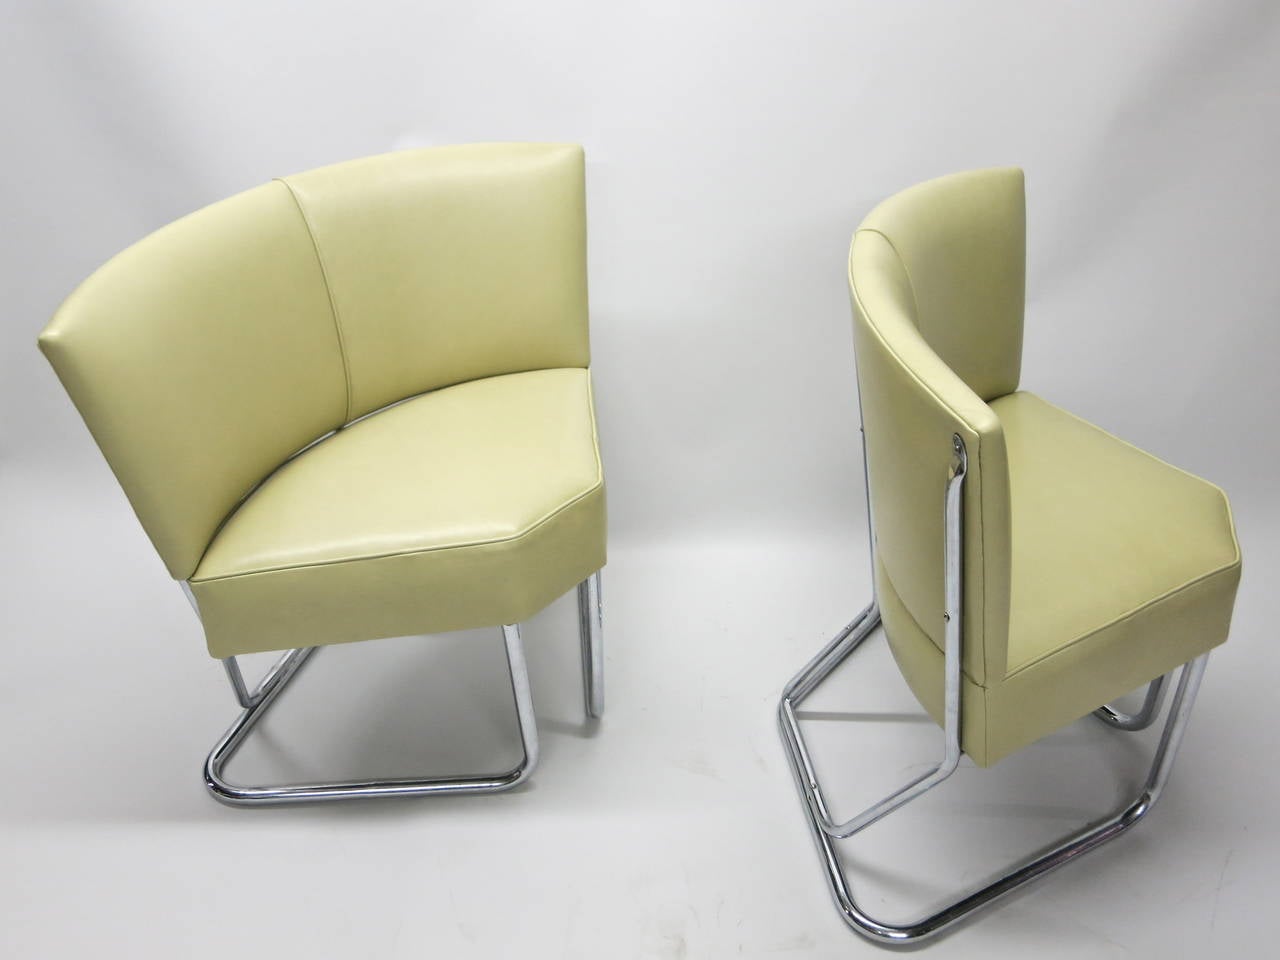 Art Deco Pair or Arched Back Chairs by Thonet, USA Circa 1940